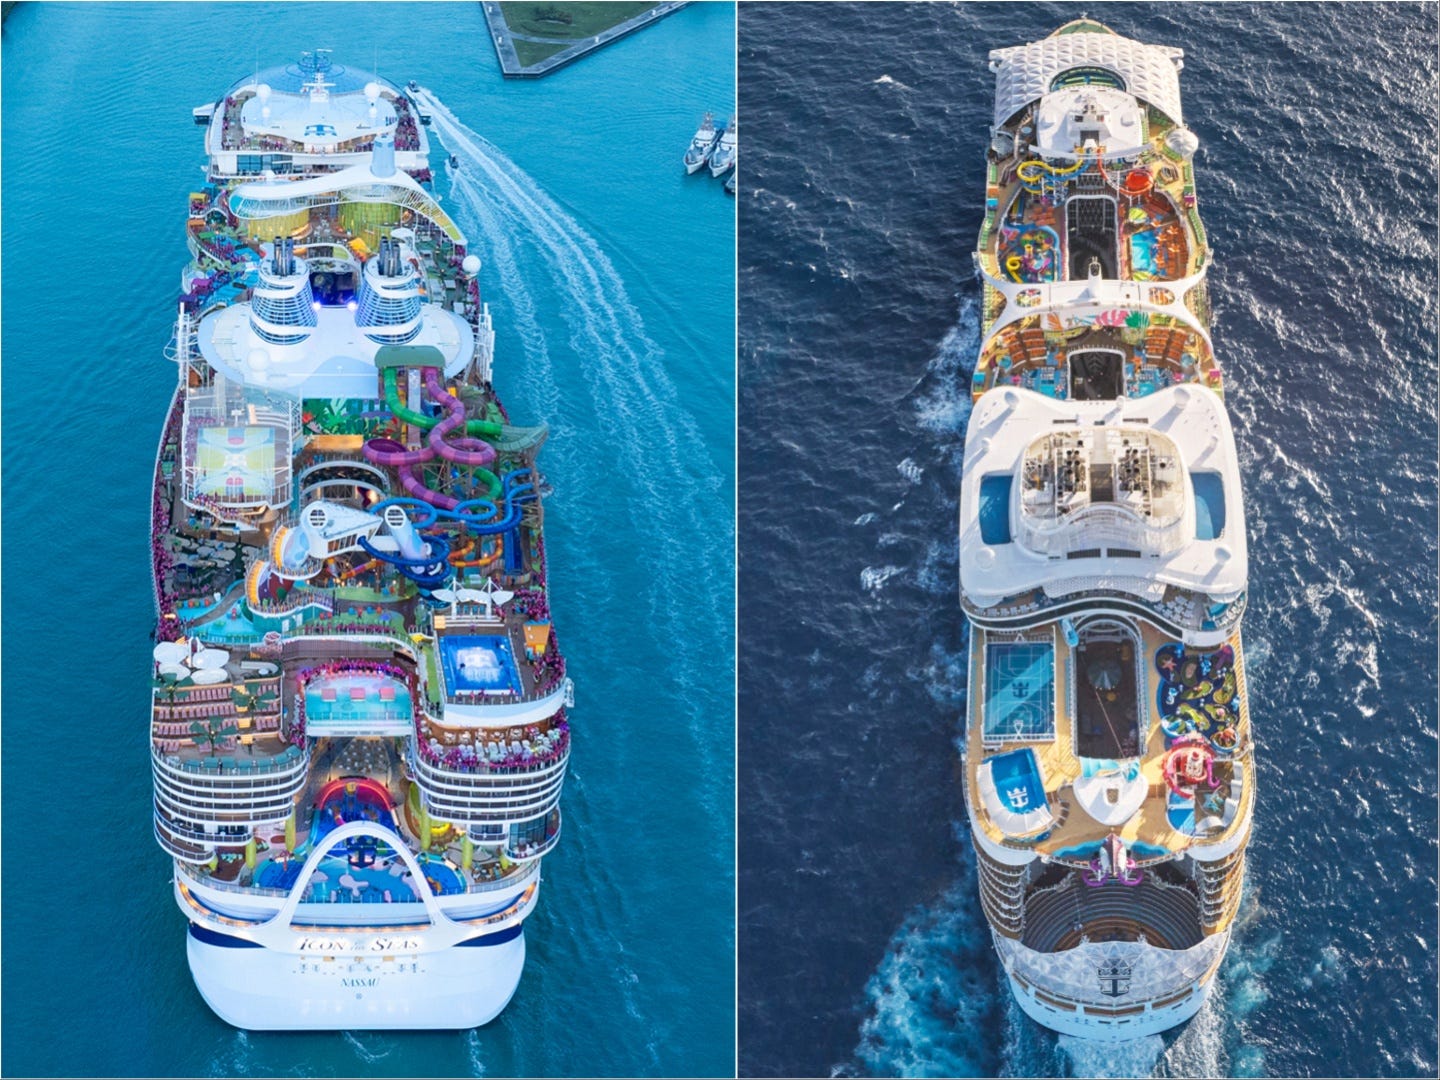 <p>It is, however, 52 feet wider and has a higher double occupancy capacity of 5,668 guests.</p><p>Royal Caribbean did not respond to Business Insider's request about Utopia's maximum capacity. But for reference, <a href="https://www.businessinsider.com/royal-caribbean-icon-of-the-seas-cruise-budget-upgrades-lobster-2024-4">Icon of the Seas</a> — which has 29 fewer cabins — can accommodate 5,610 guests at double occupancy and 7,600 at full.</p>